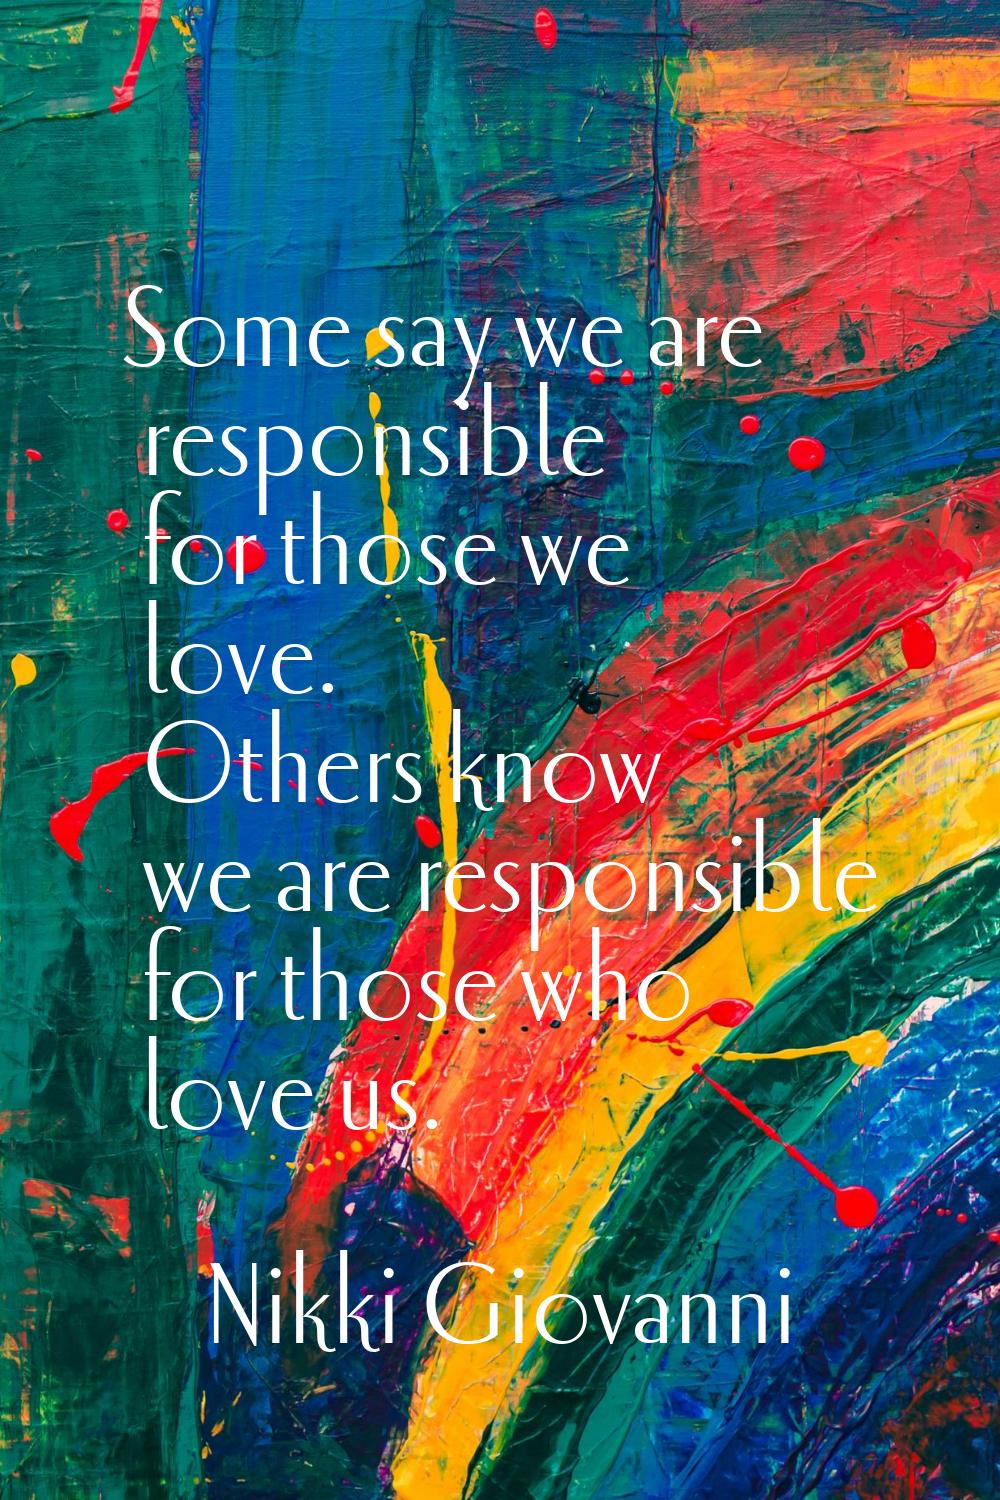 Some say we are responsible for those we love. Others know we are responsible for those who love us